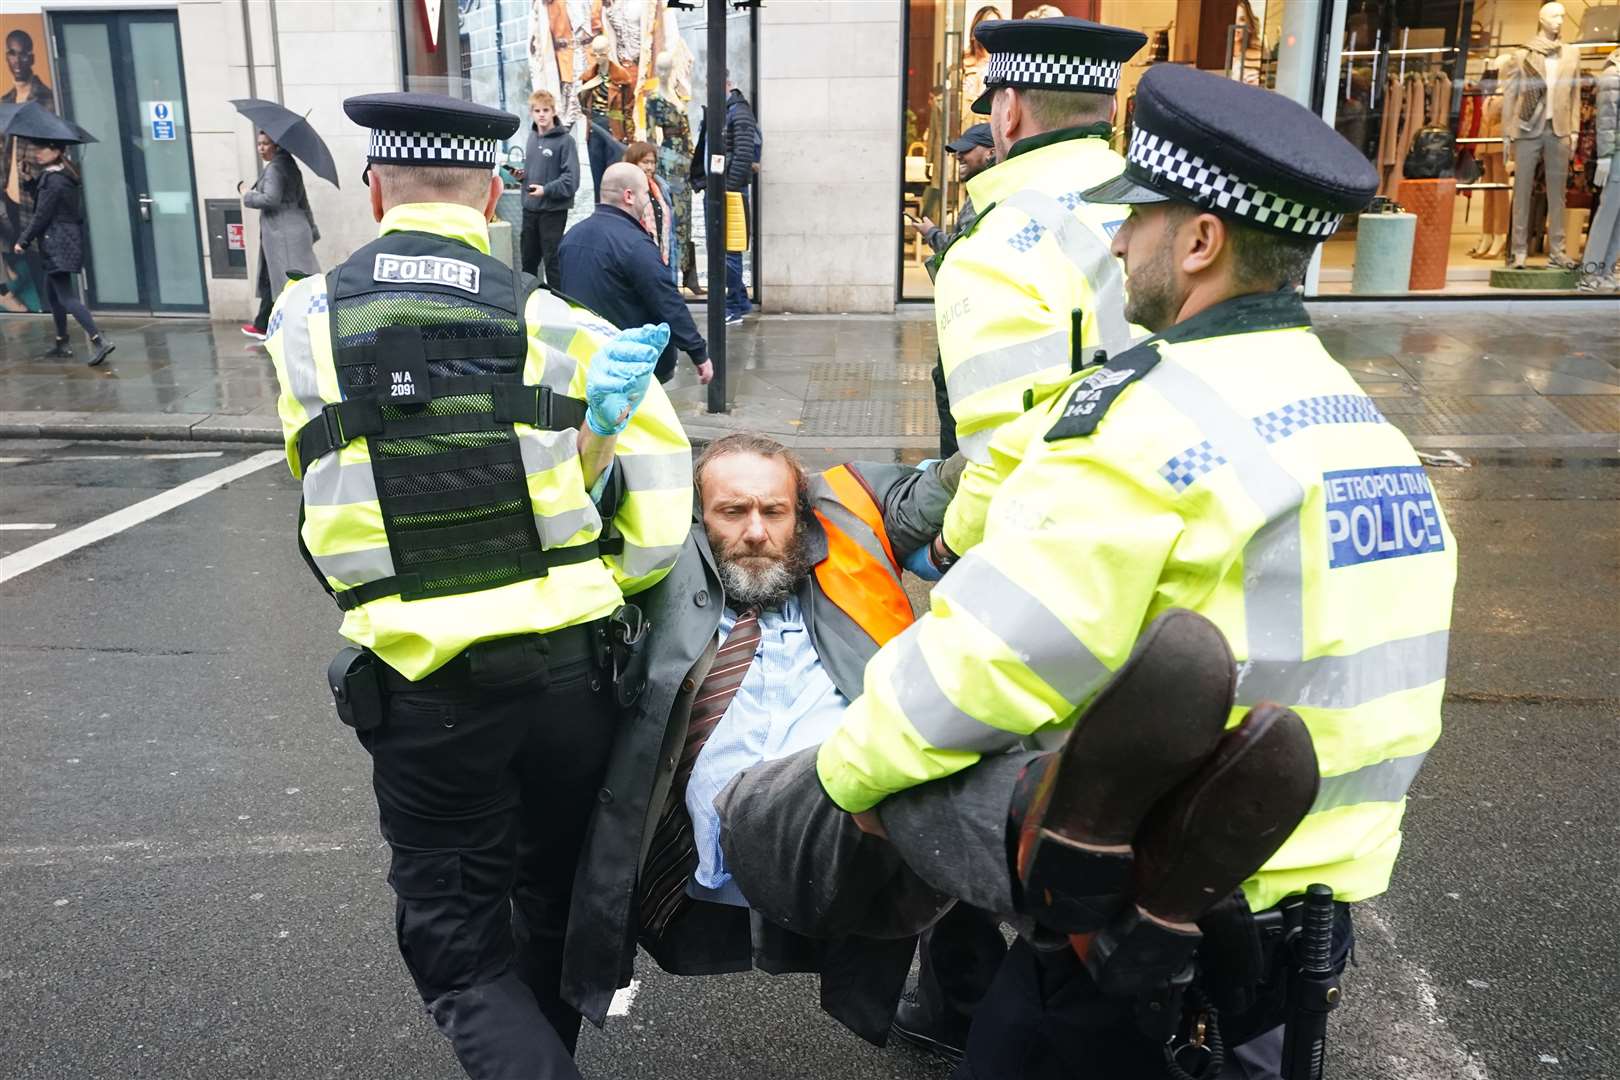 Police officers deal with activists from Just Stop Oil during their protest outside Harrods department store in Knightsbridge, London in October (Ian West/PA)